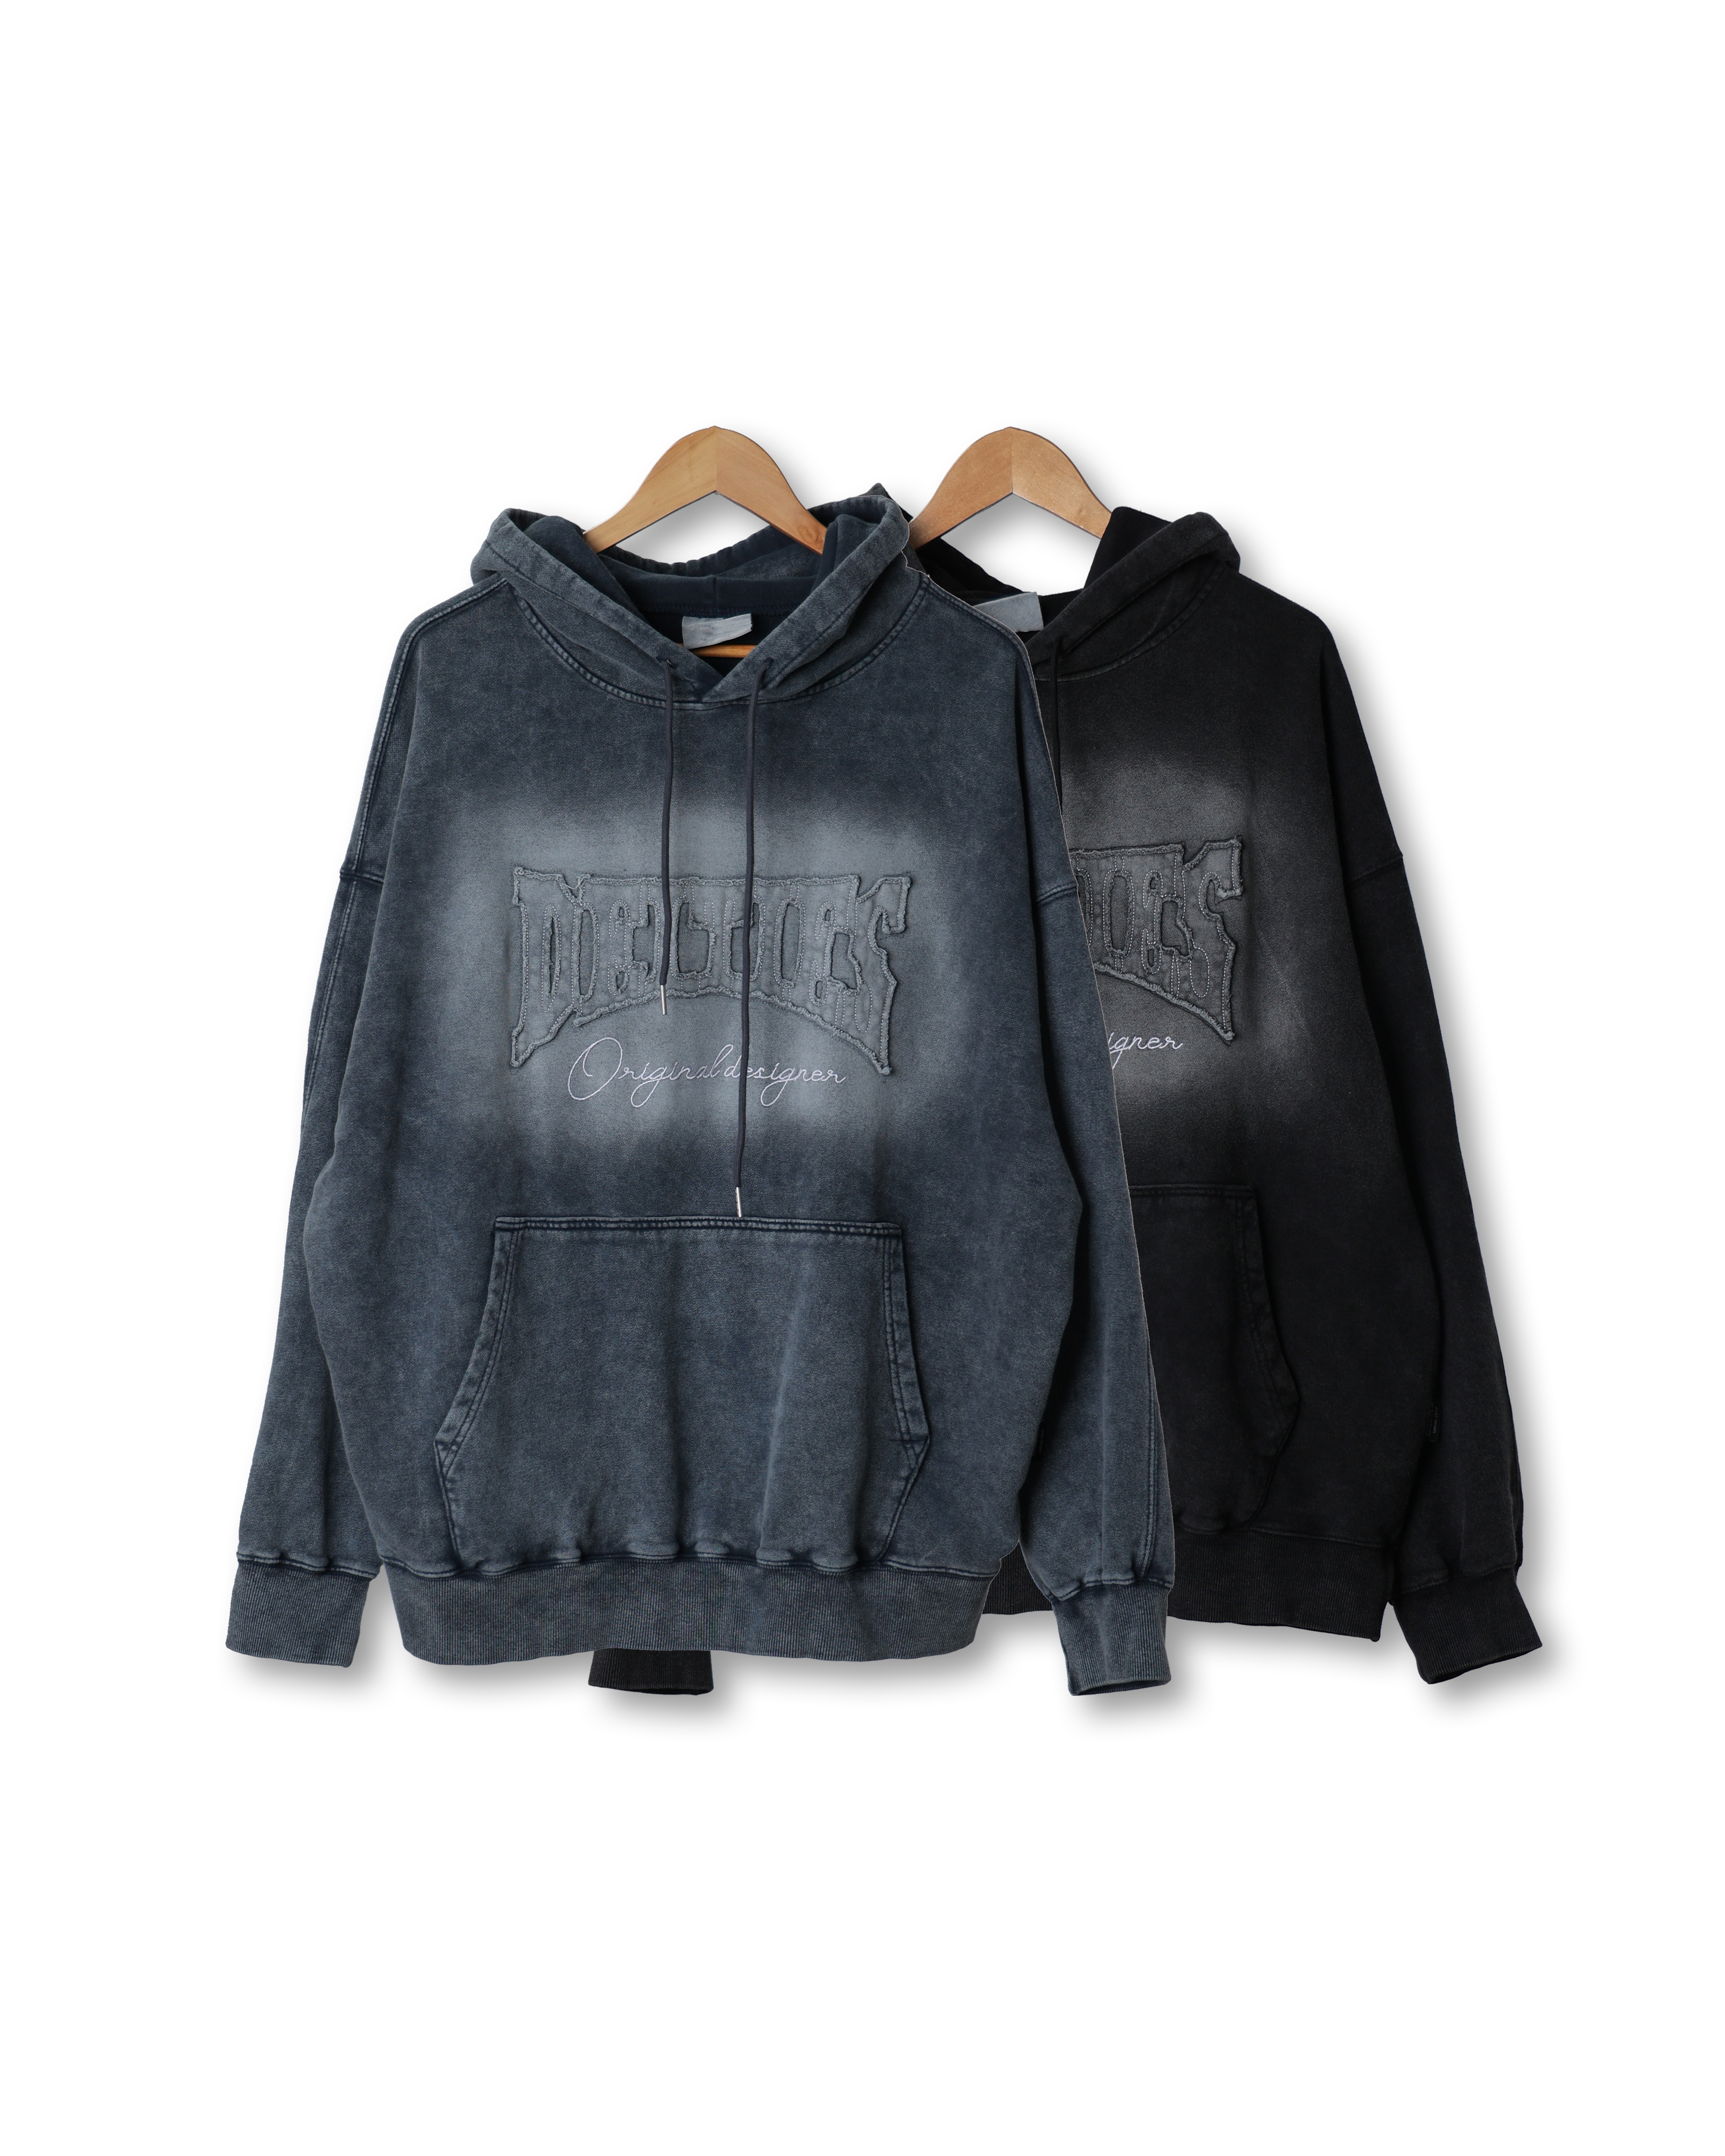 CLER Snow Dyeing Vintage Over Hoodie (Charcoal/Navy)